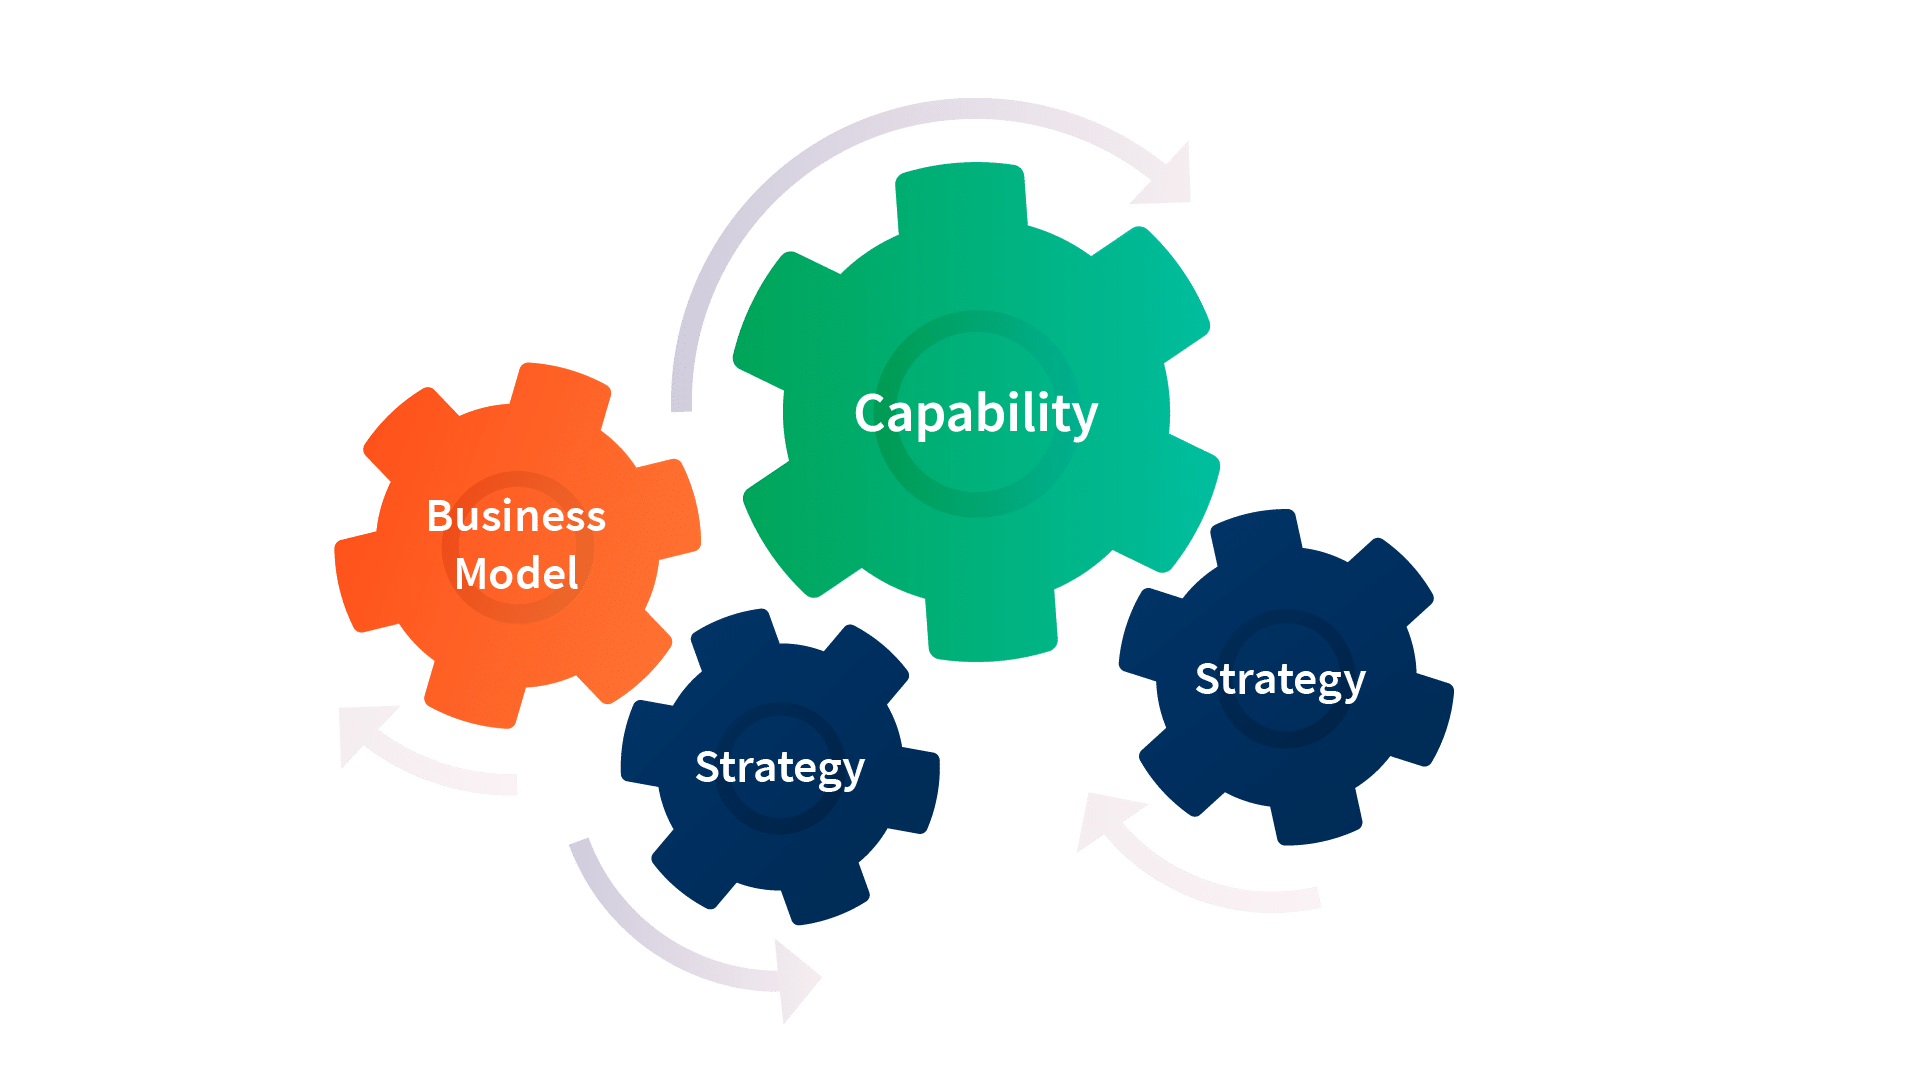 A schematic representation on how Capabilities, Strategy and Business Model are interconnected in a system of gears